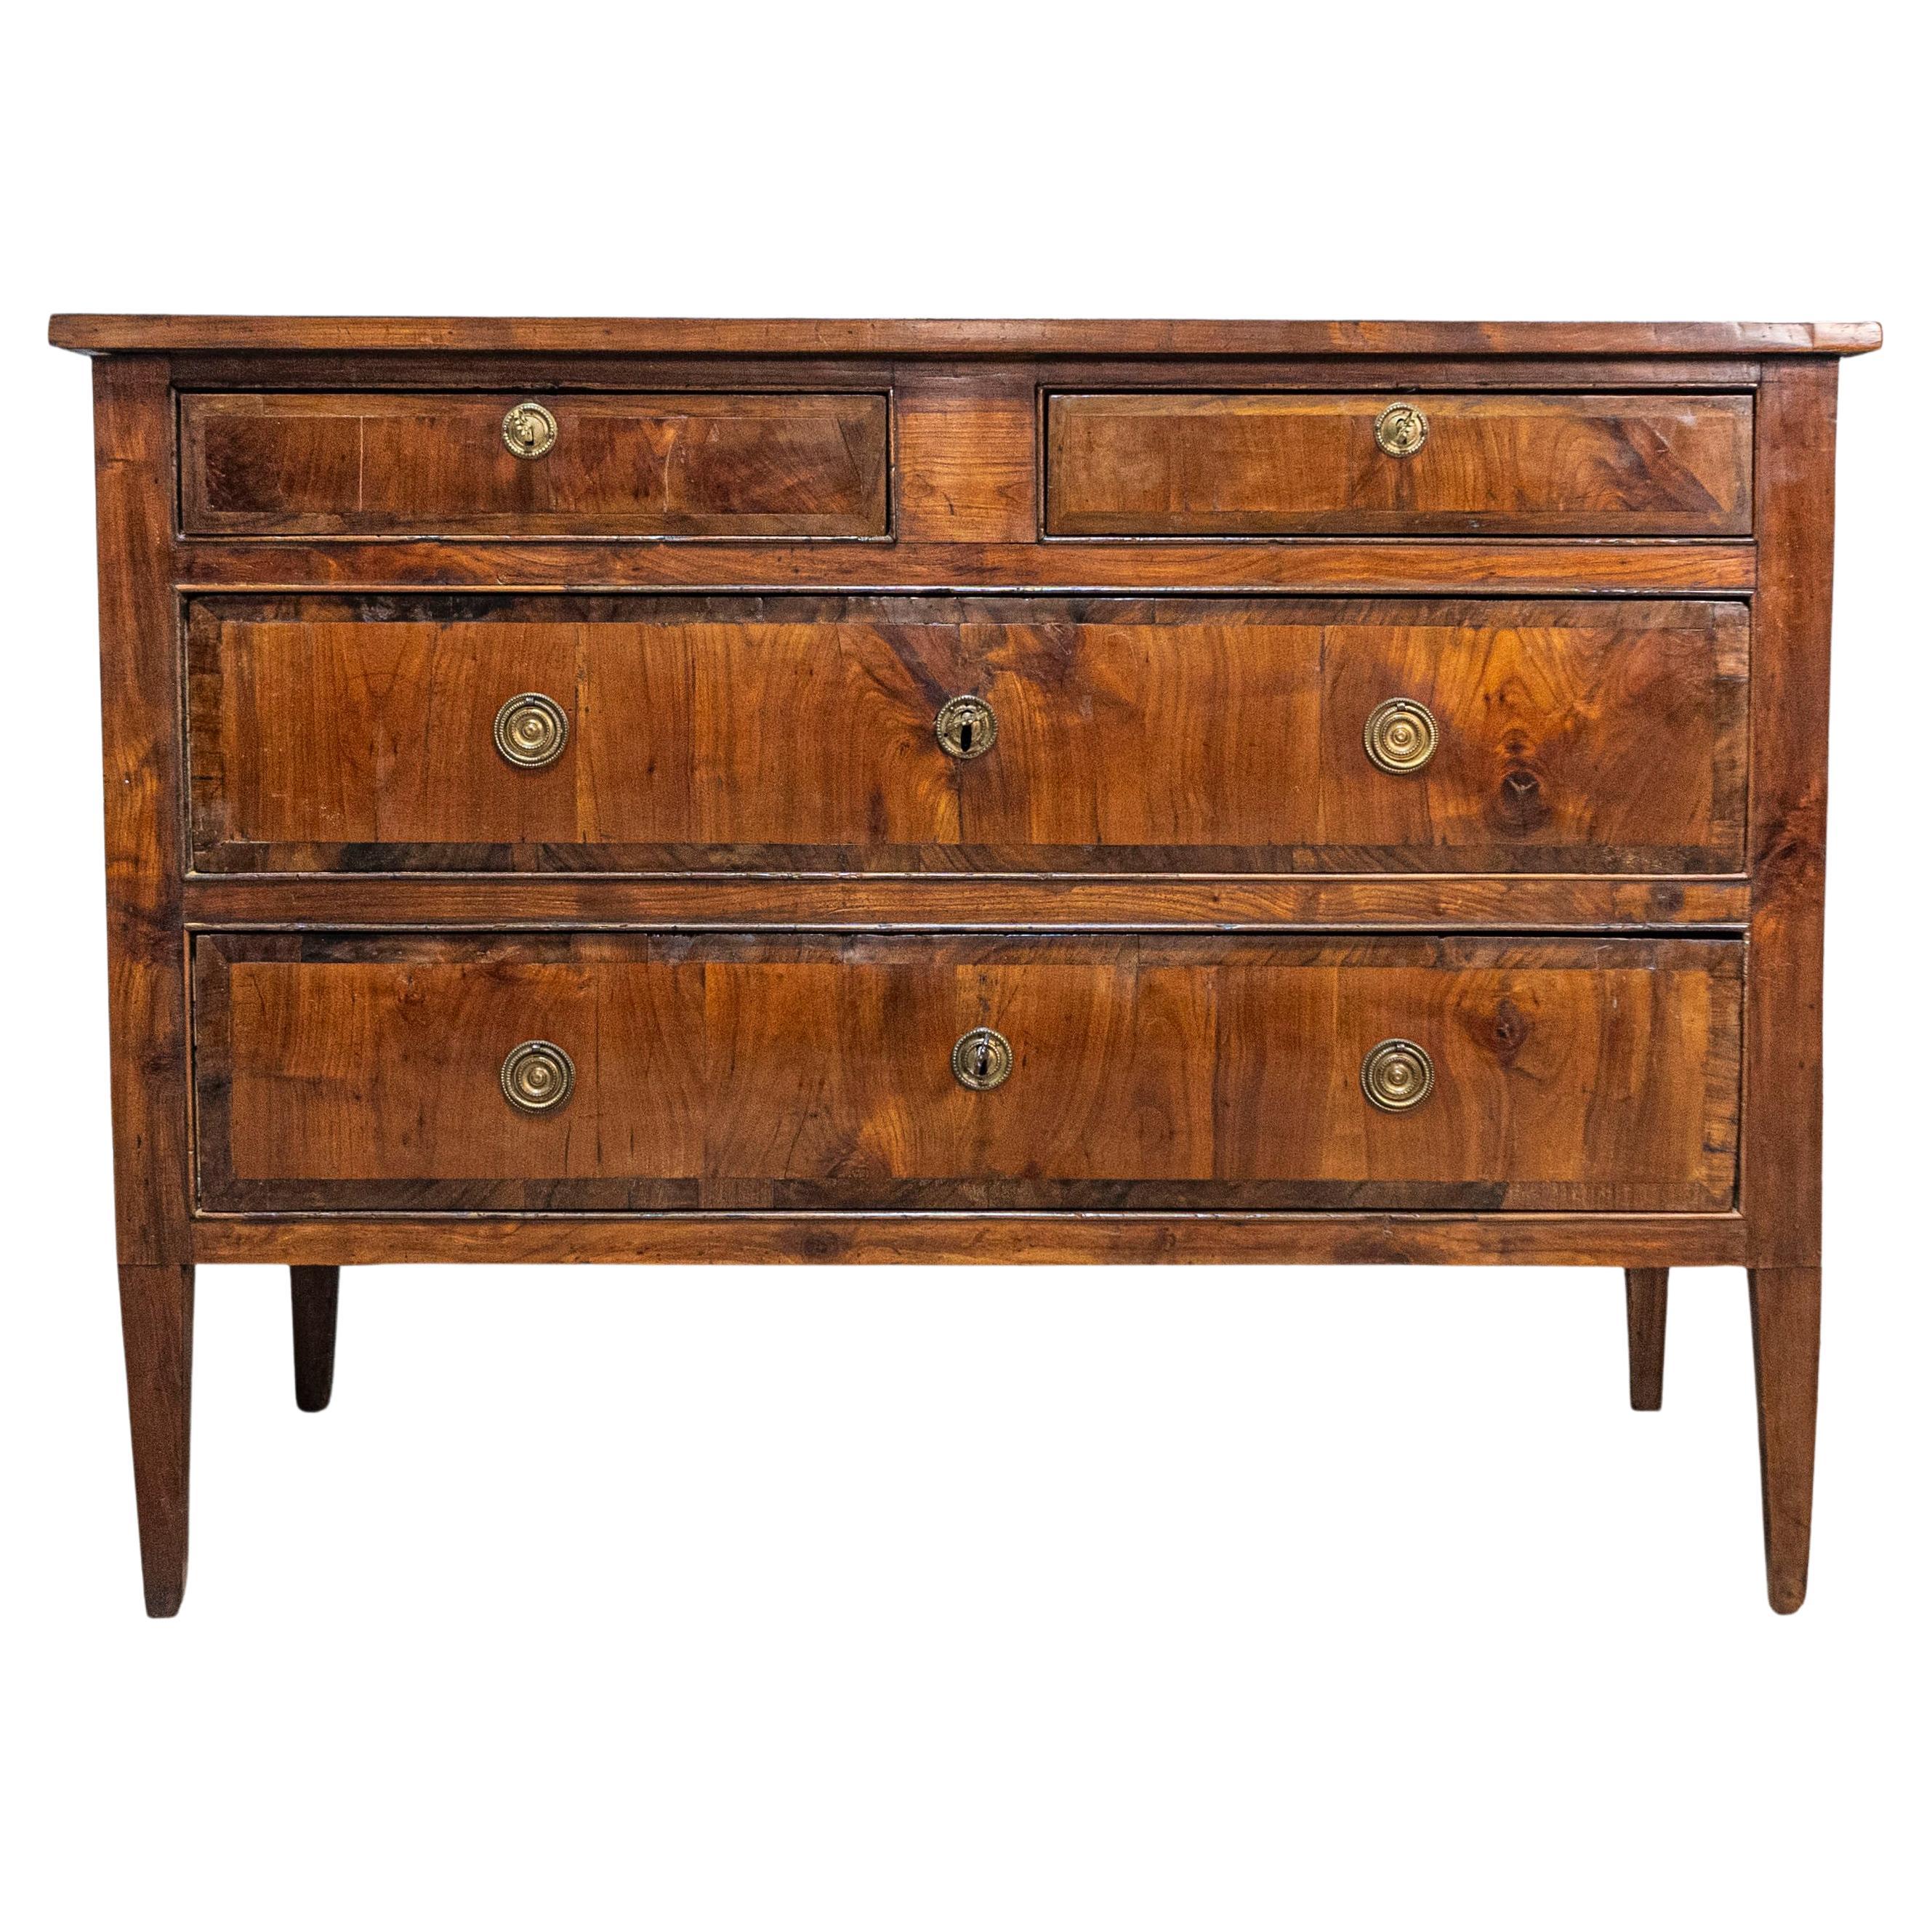 Italian Neoclassical Period 18th Century Walnut Commode with Four Drawers